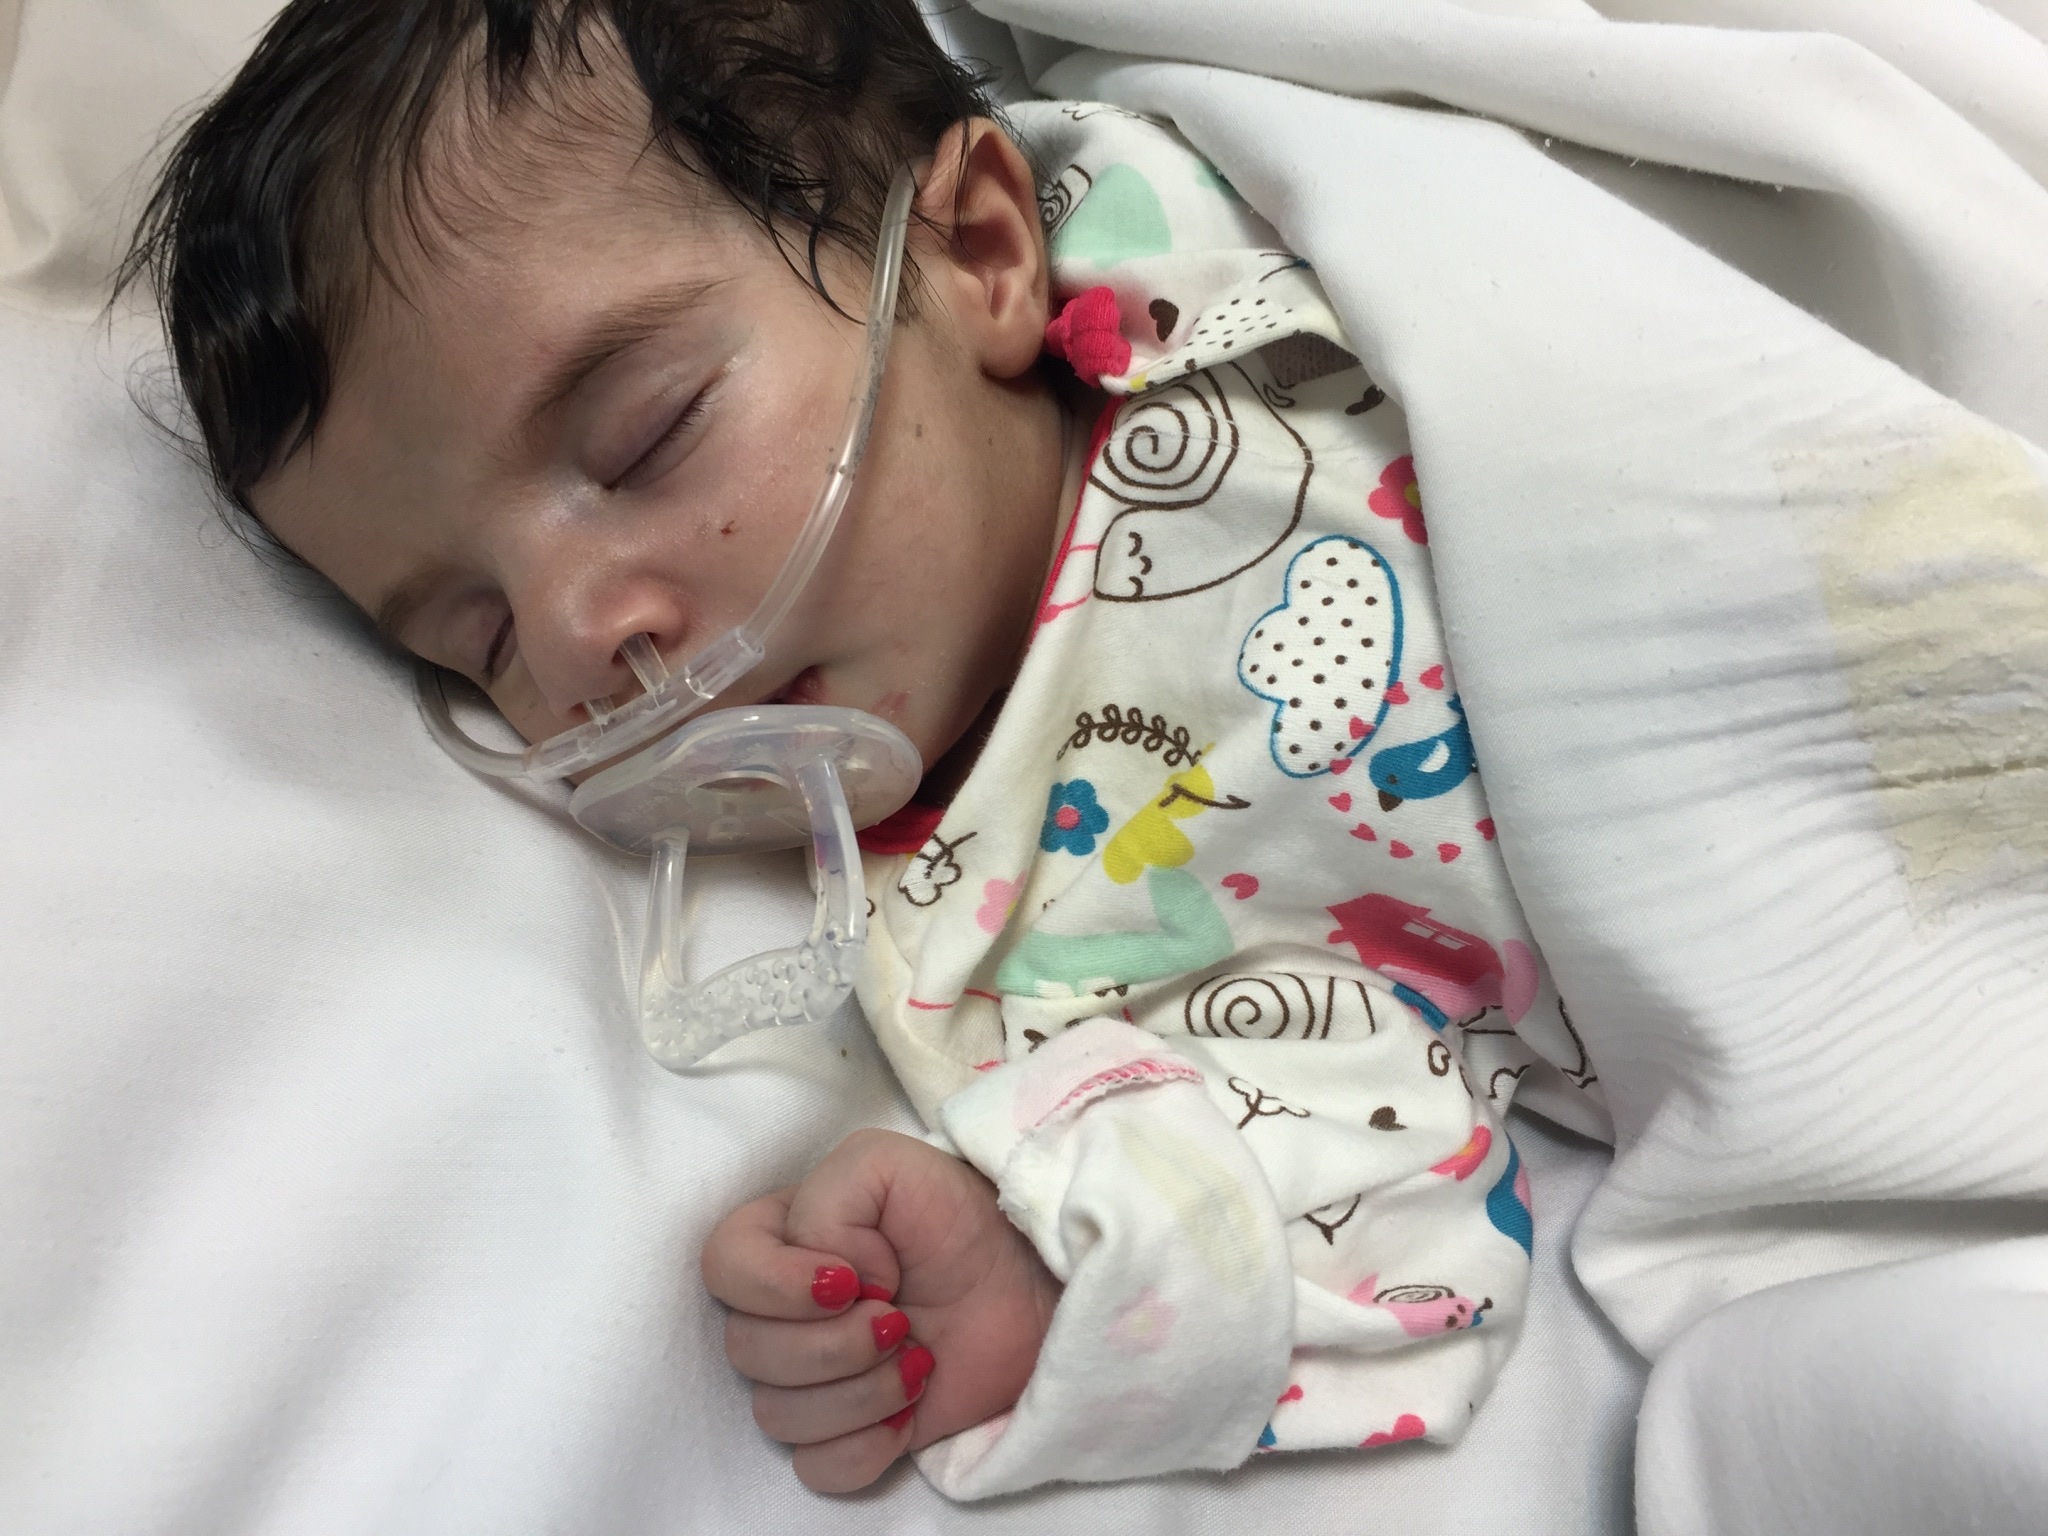 Read more about the article Stories from Iran—After Lifesaving Surgery, Aylin’s Parents Dream About Her Future